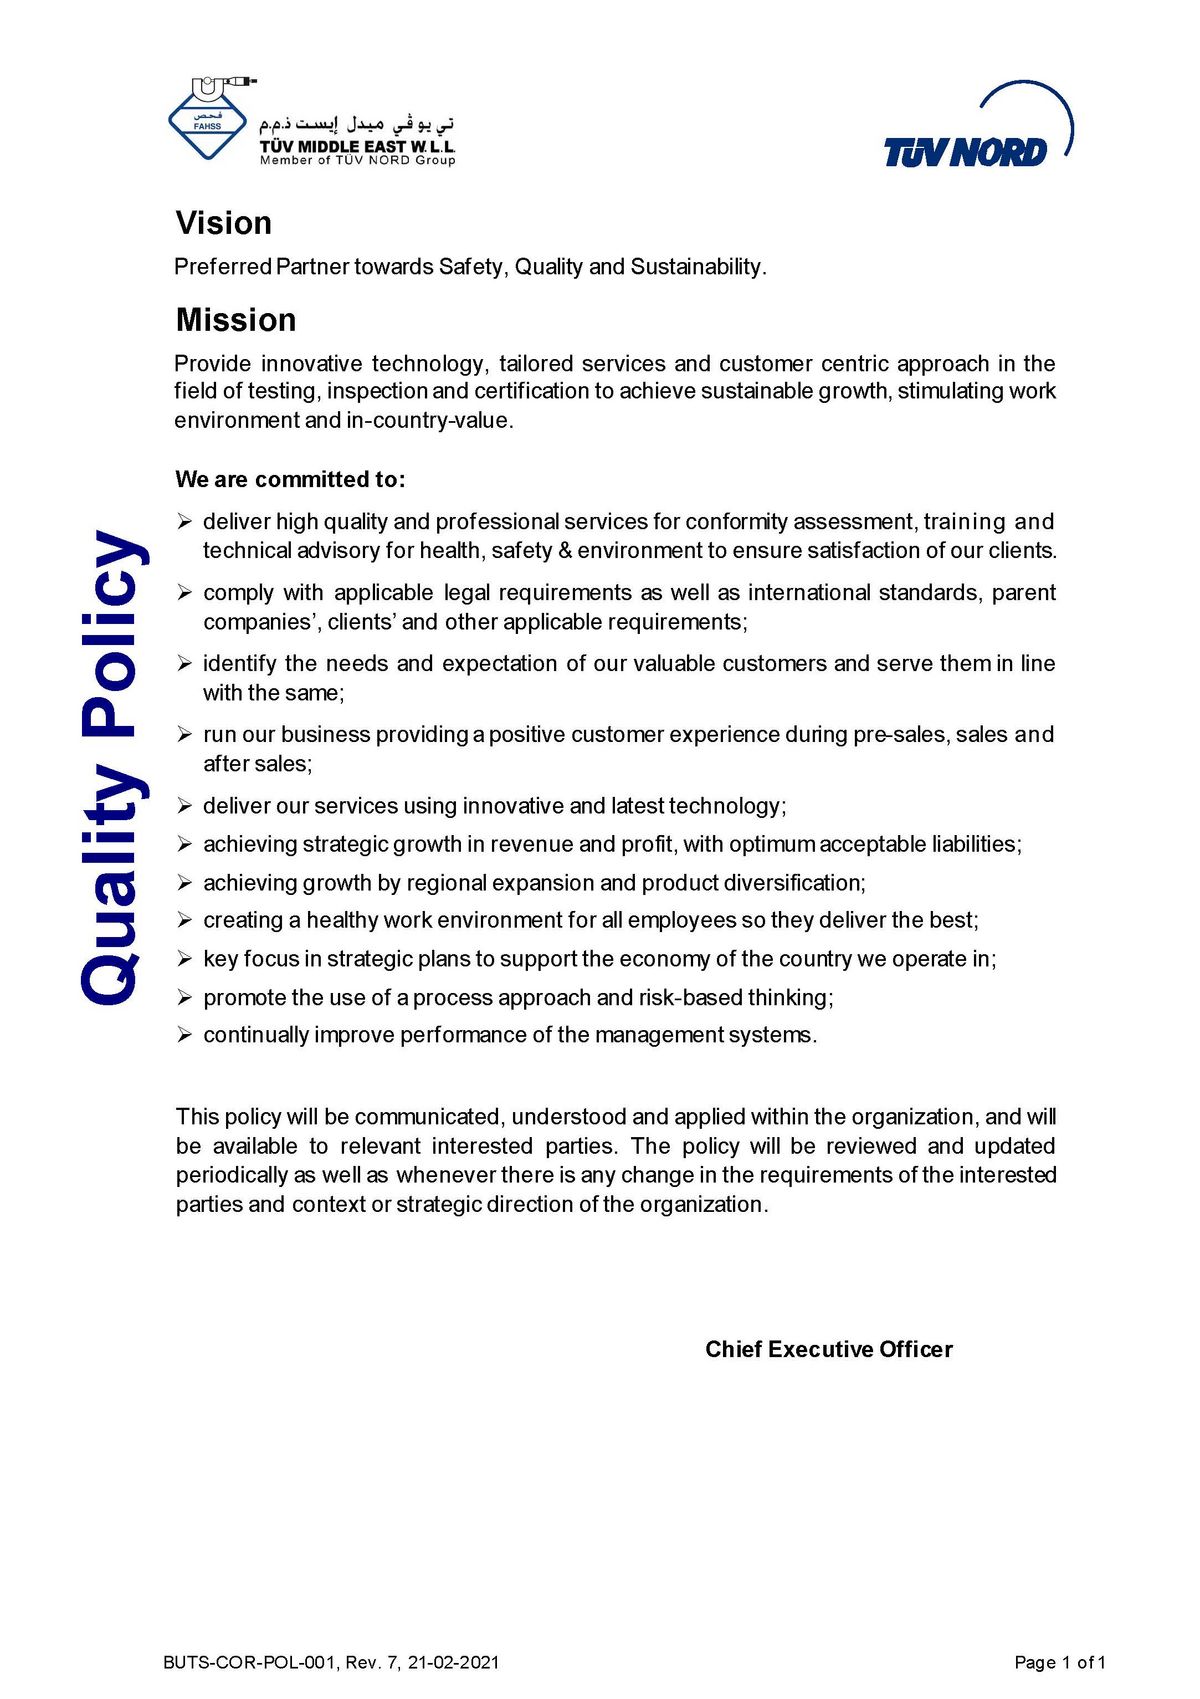 Quality and Health, Safety & Environment Policy - Our Company | TÜV